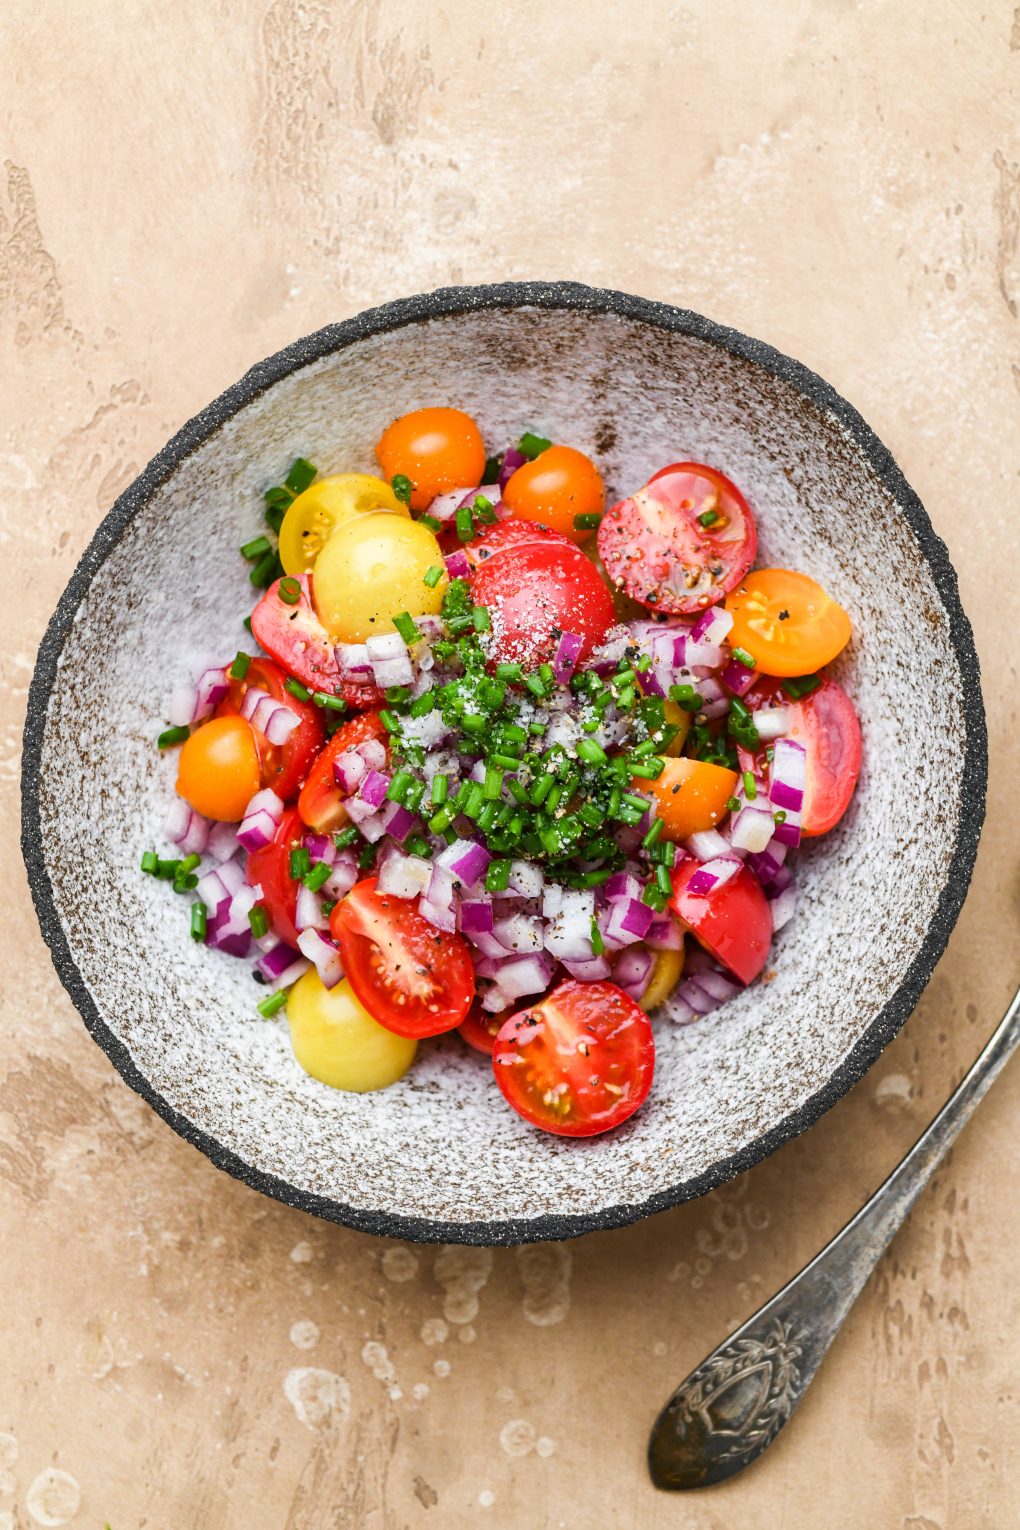 A small textured bowl with the ingredients for the cherry tomato salad garnish before mixing.